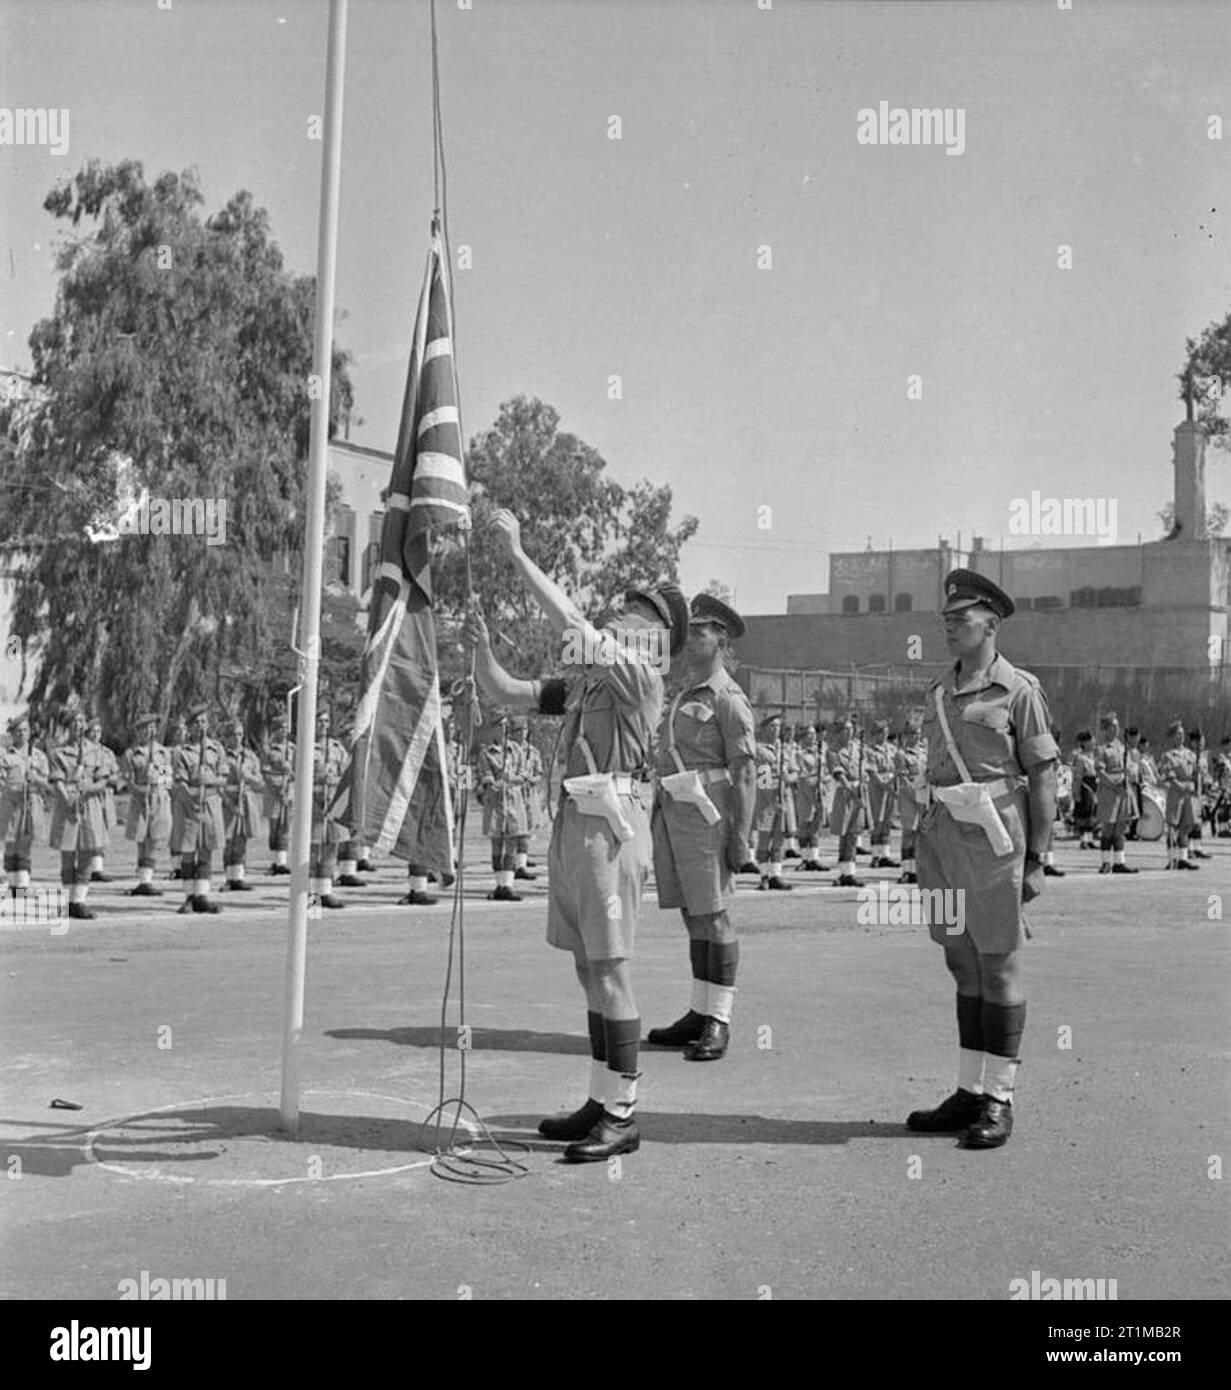 British Forces in the Middle East, 1945-1947 A sergeant of the Corps of Military Police lowers the Union Jack during the ceremony to mark the formal handover of the Citadel in Cairo to local control. This ceremony was the first step towards the ending of British rule in Egypt. Stock Photo